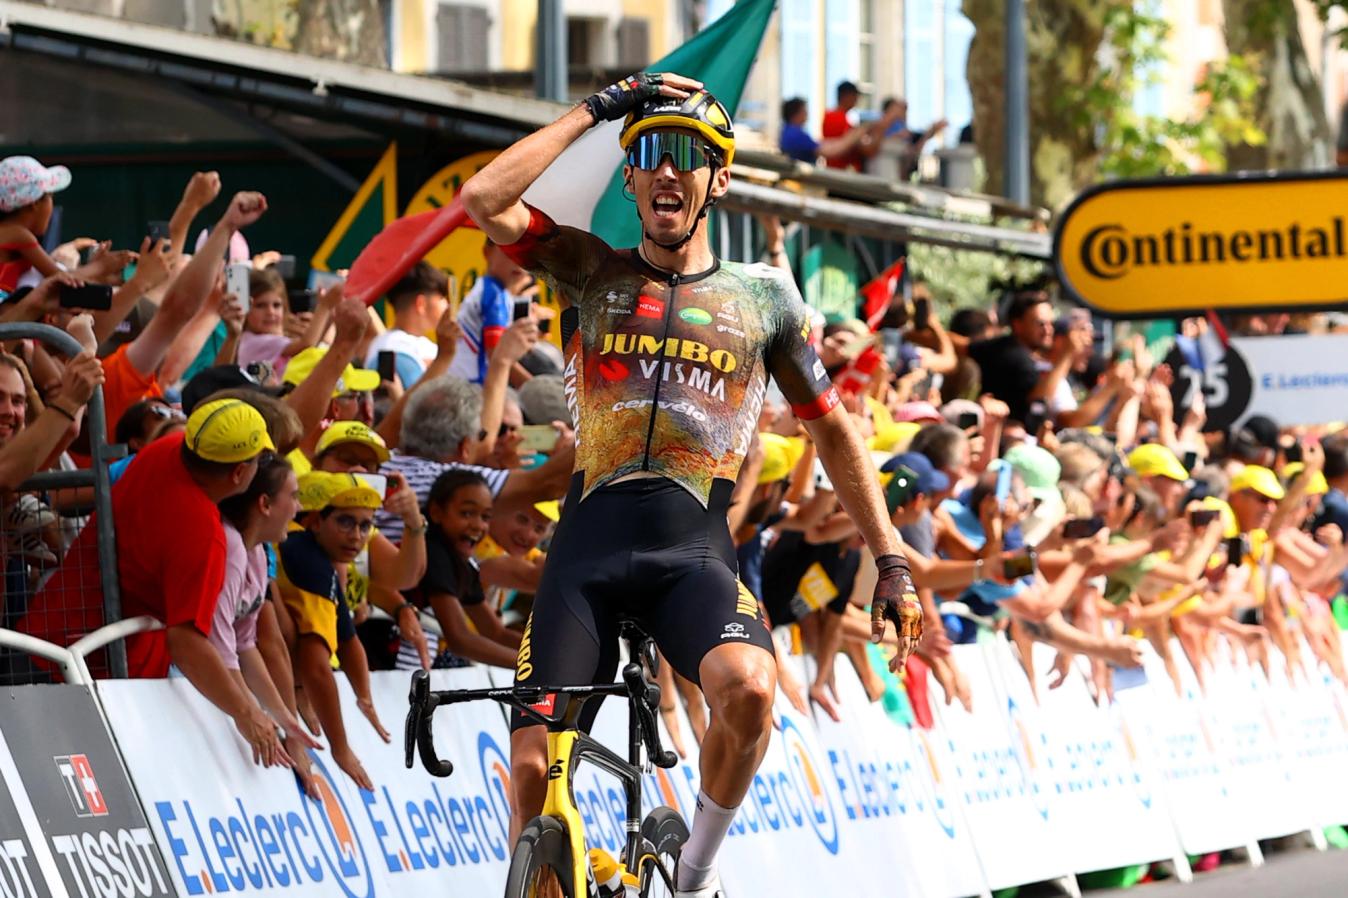 Christophe Laporte won a stage in the final week of the 2022 Tour de France, as Jumbo-Visma dominated the race